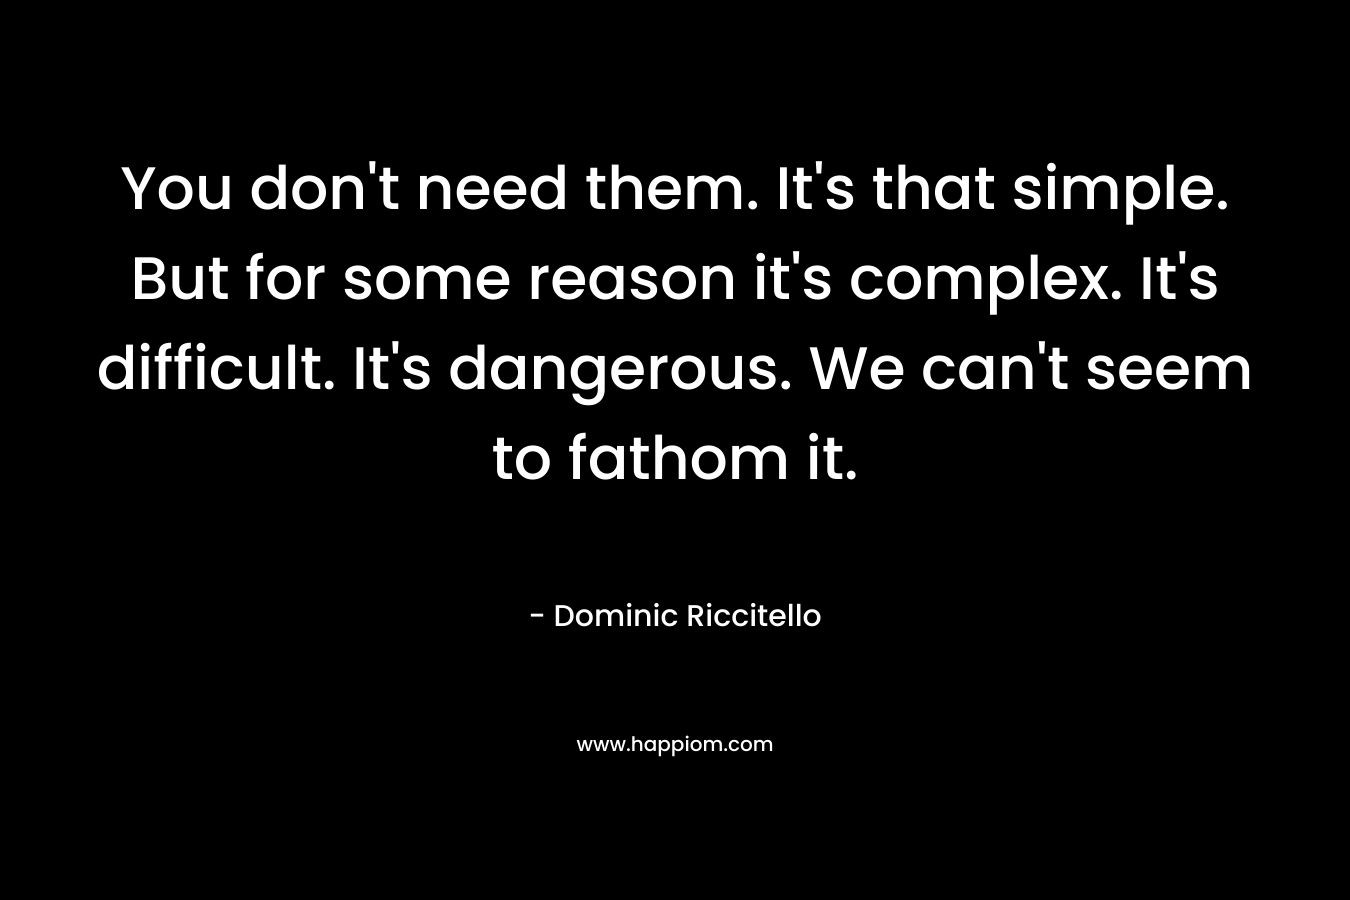 You don't need them. It's that simple. But for some reason it's complex. It's difficult. It's dangerous. We can't seem to fathom it.